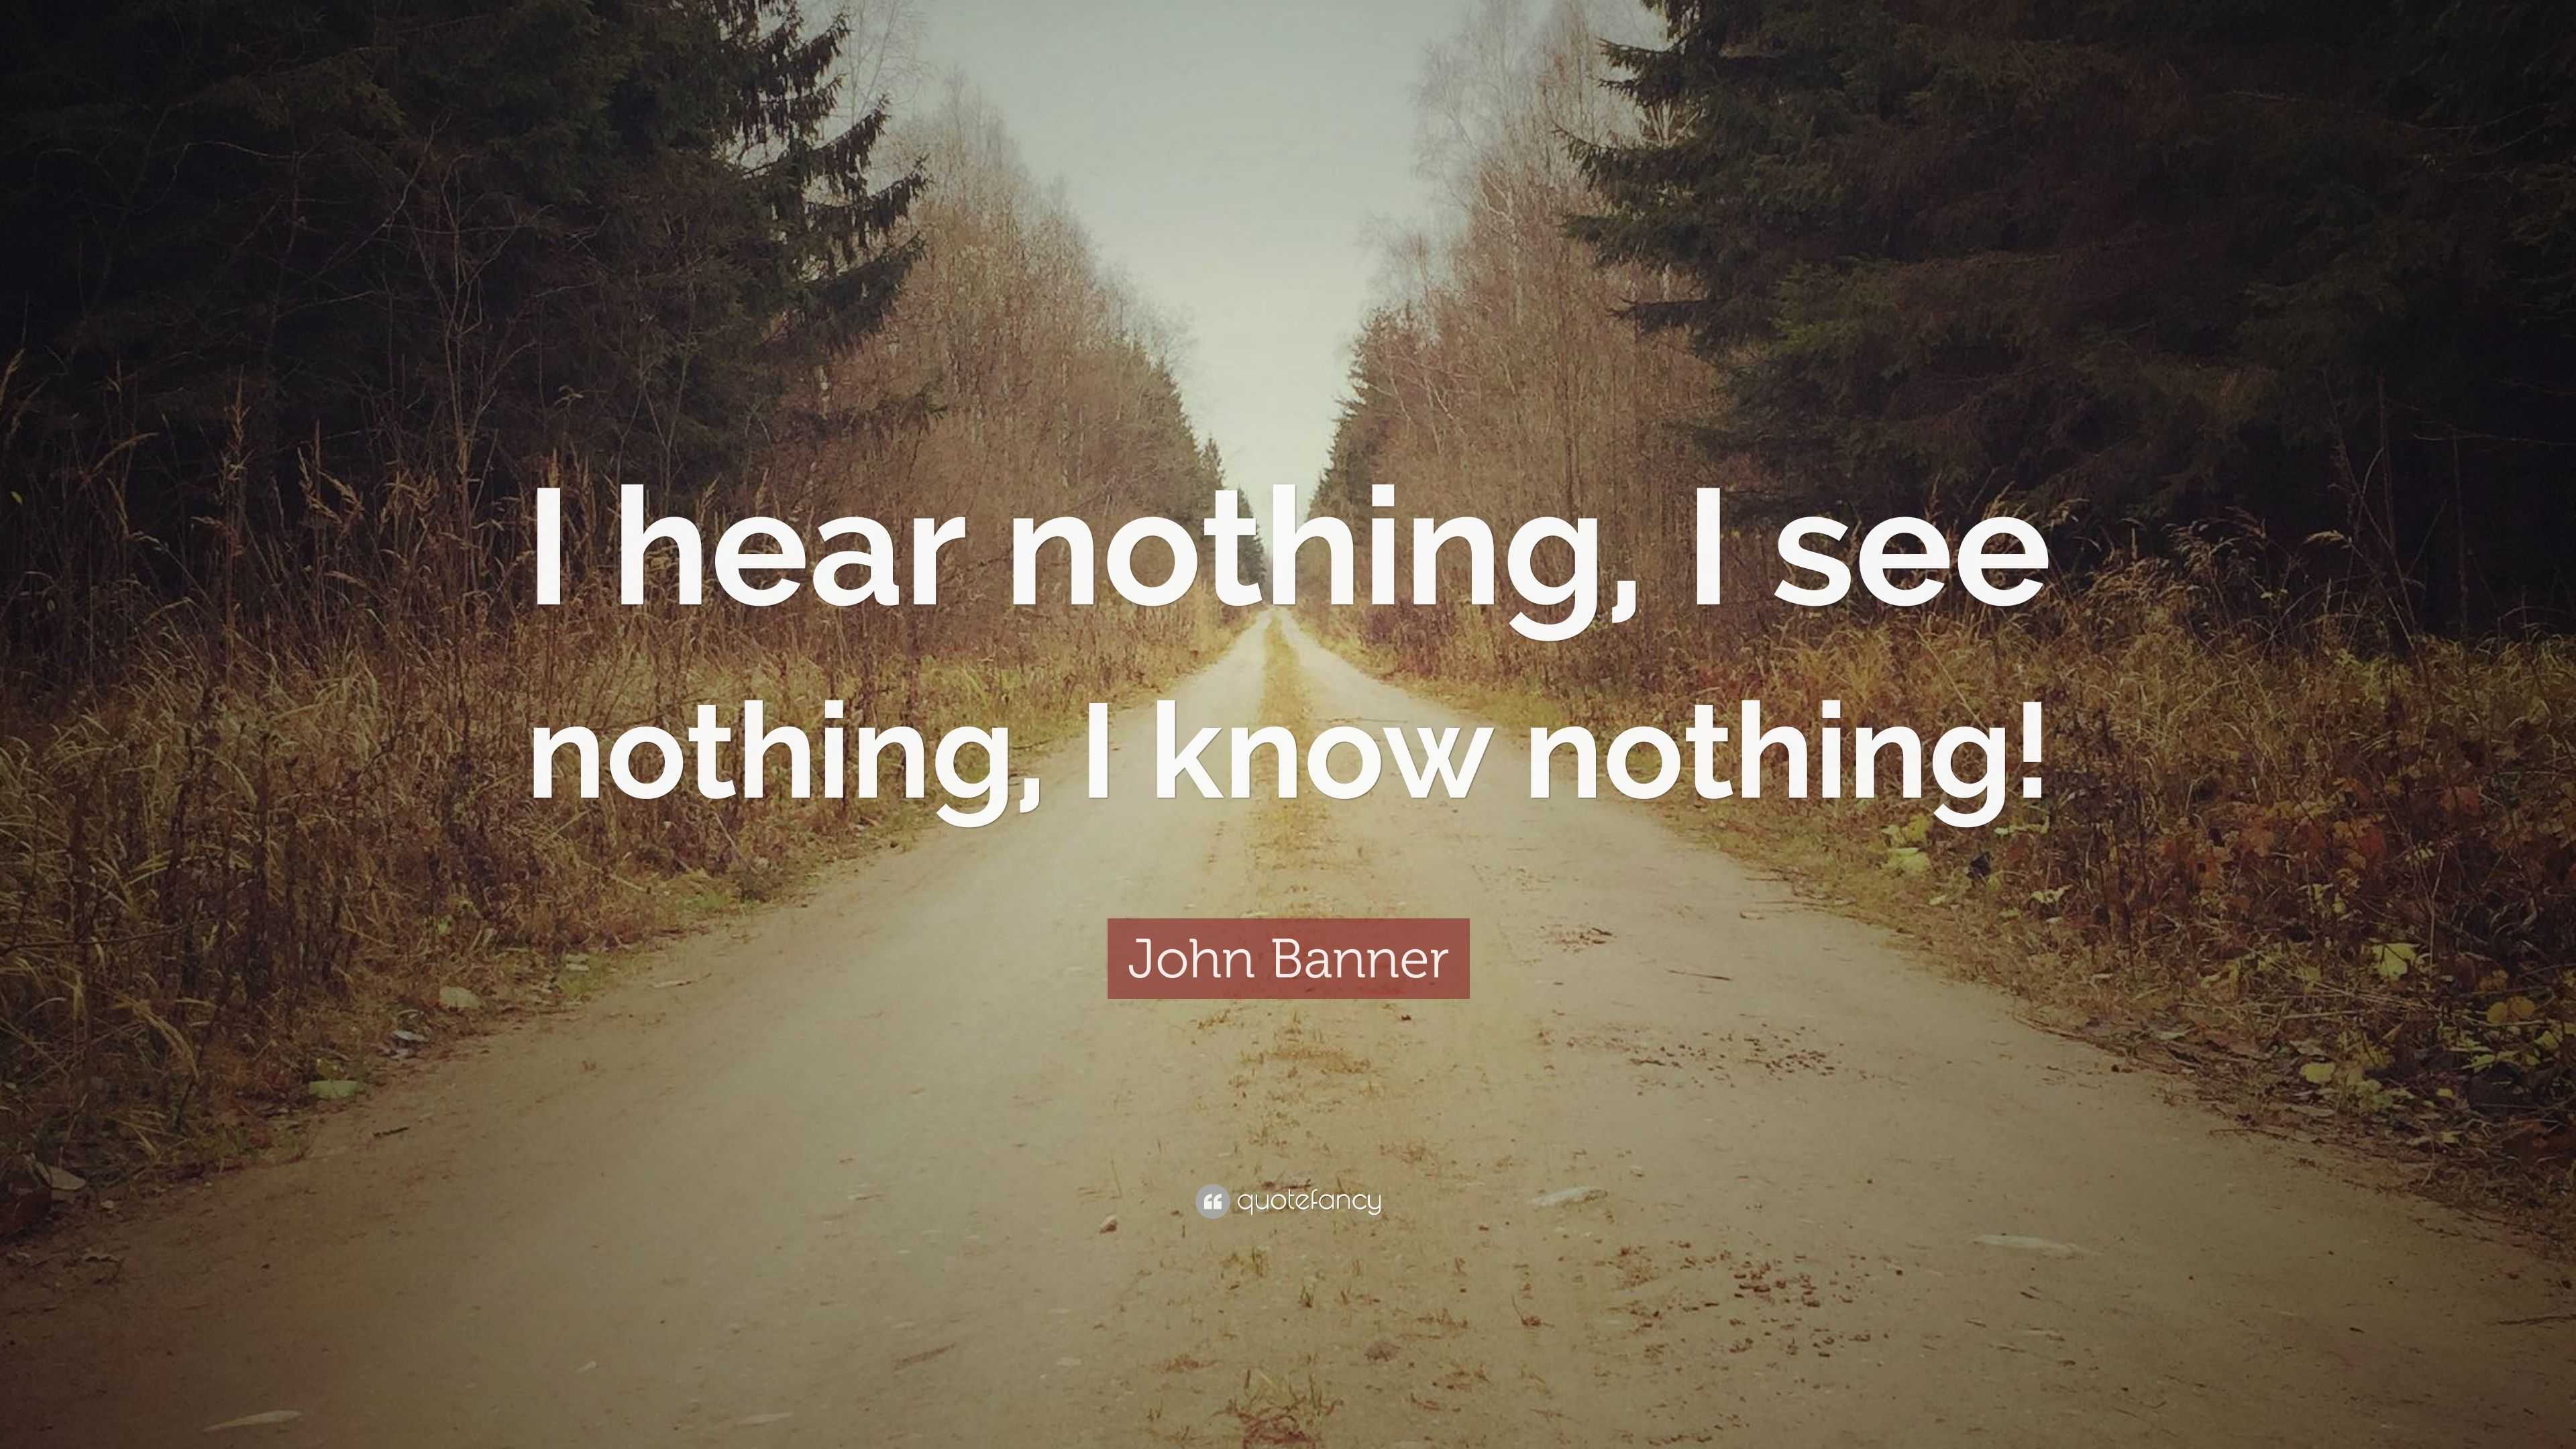 John Banner Quote “I hear nothing I see nothing I know nothing!”